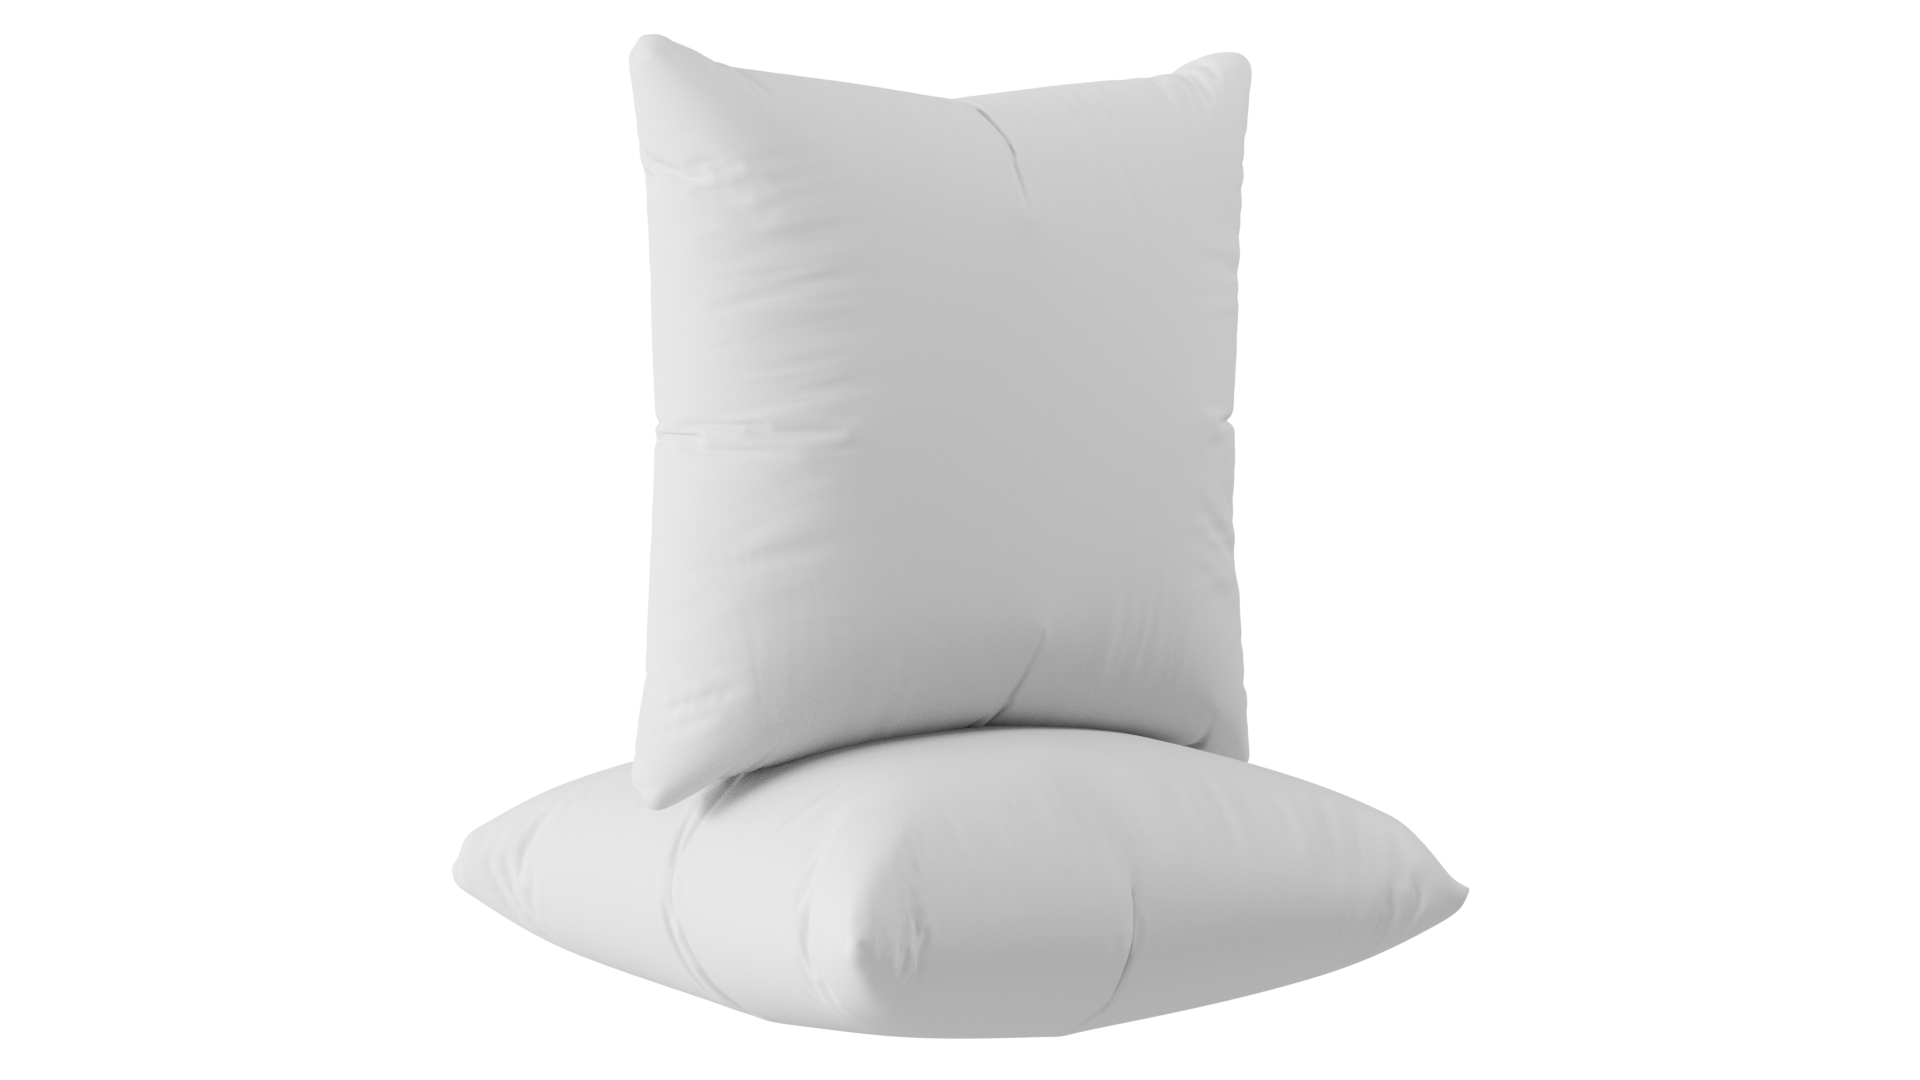 Utopia Bedding Throw Pillows Insert Pack of 2 White - 18 x 18 Inches Bed and 